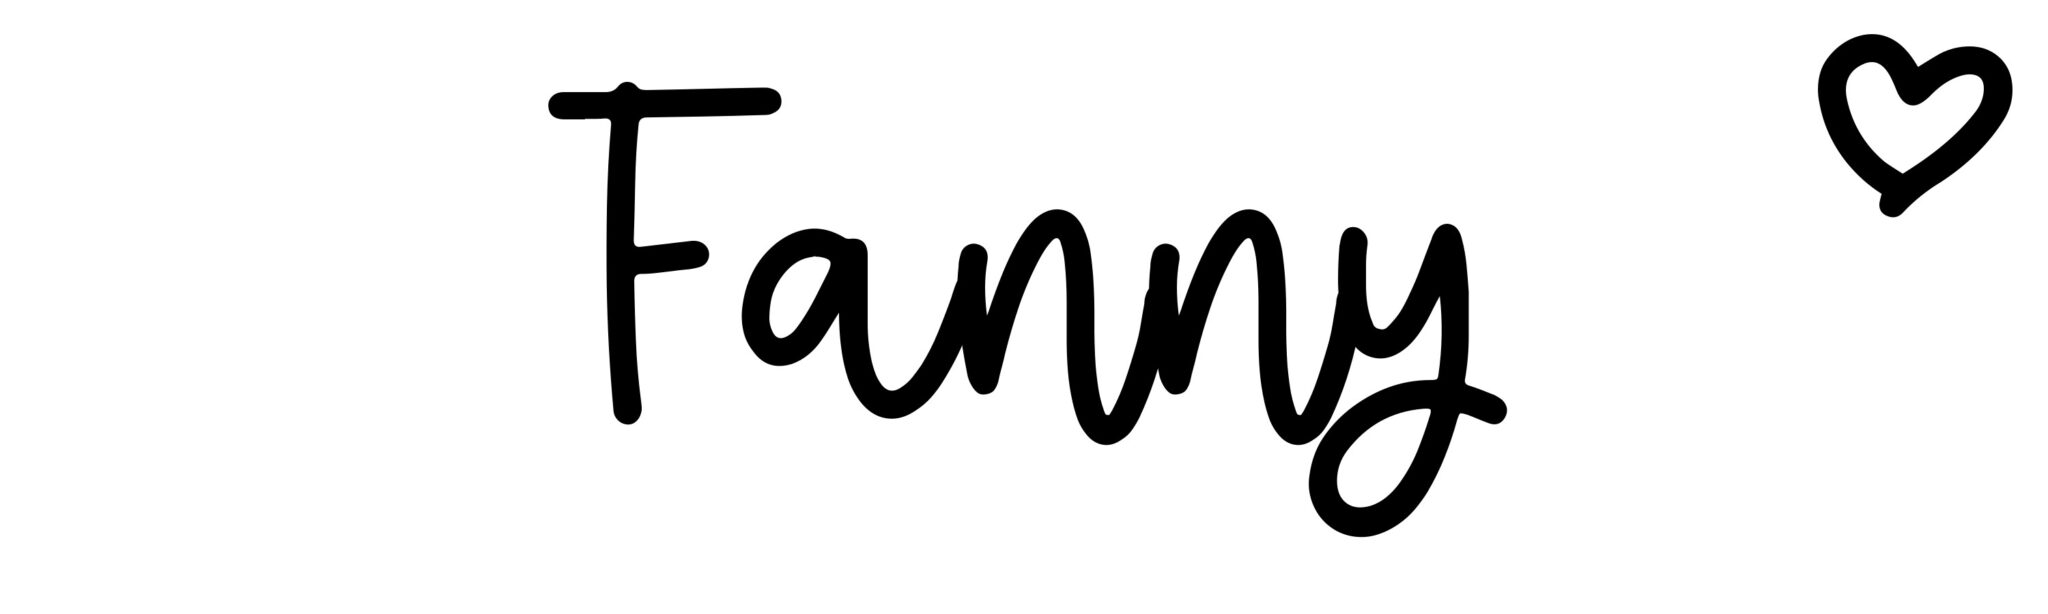 Fanny - Name meaning, origin, variations and more